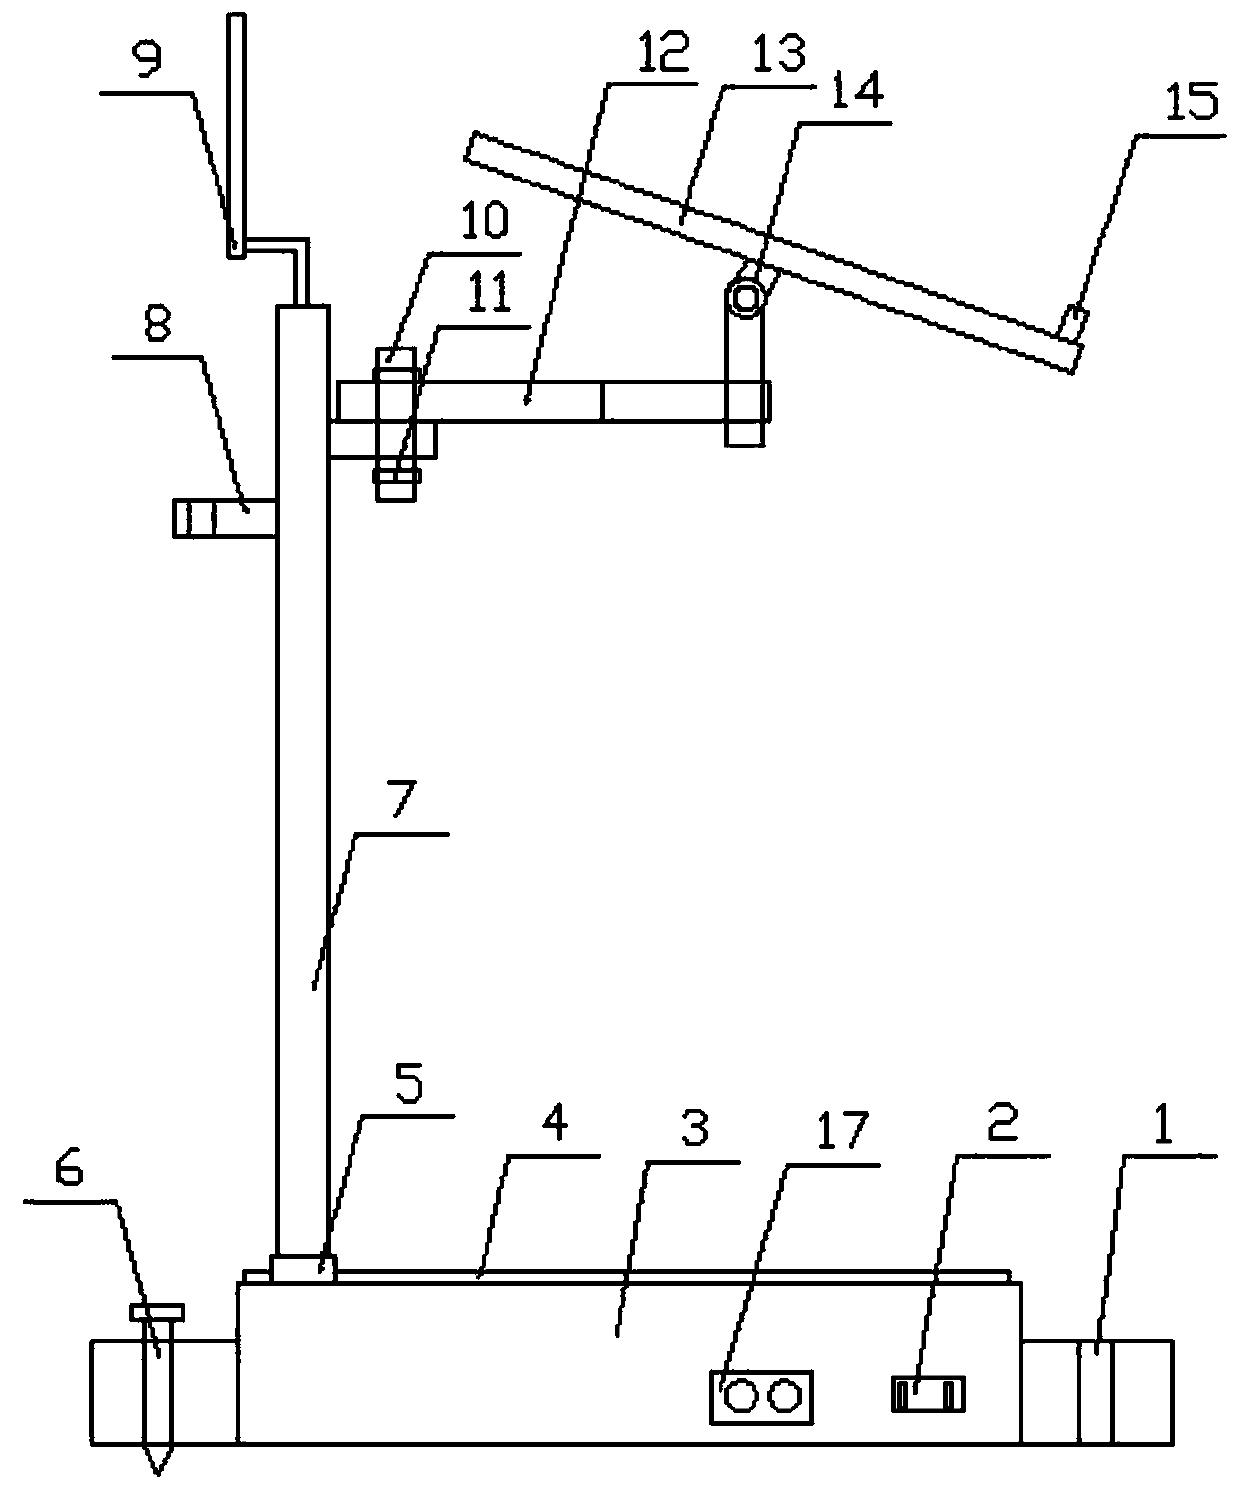 Outdoor rapidly-installed antenna rack for electronic information engineering